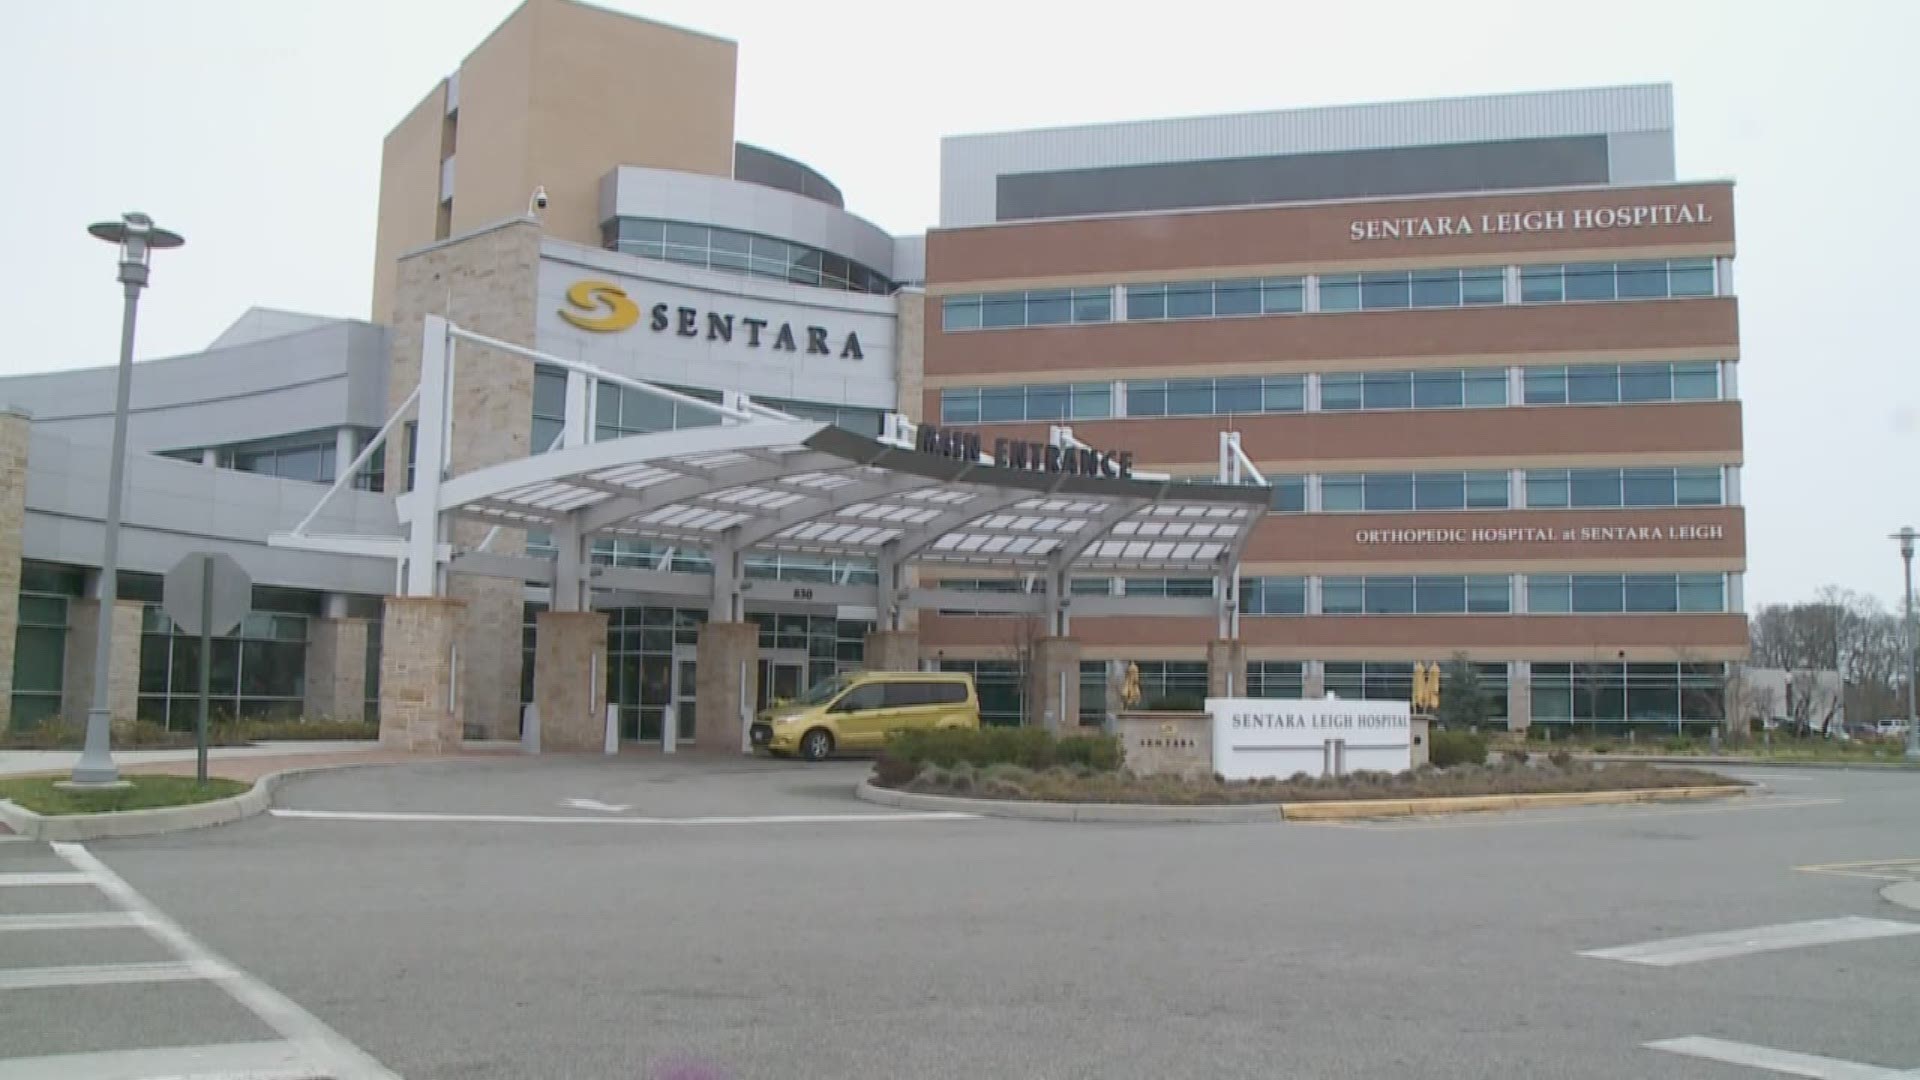 Sentara has reached a massive settlement with federal officials after a data breach. It involved hundreds of patients' protected health records.